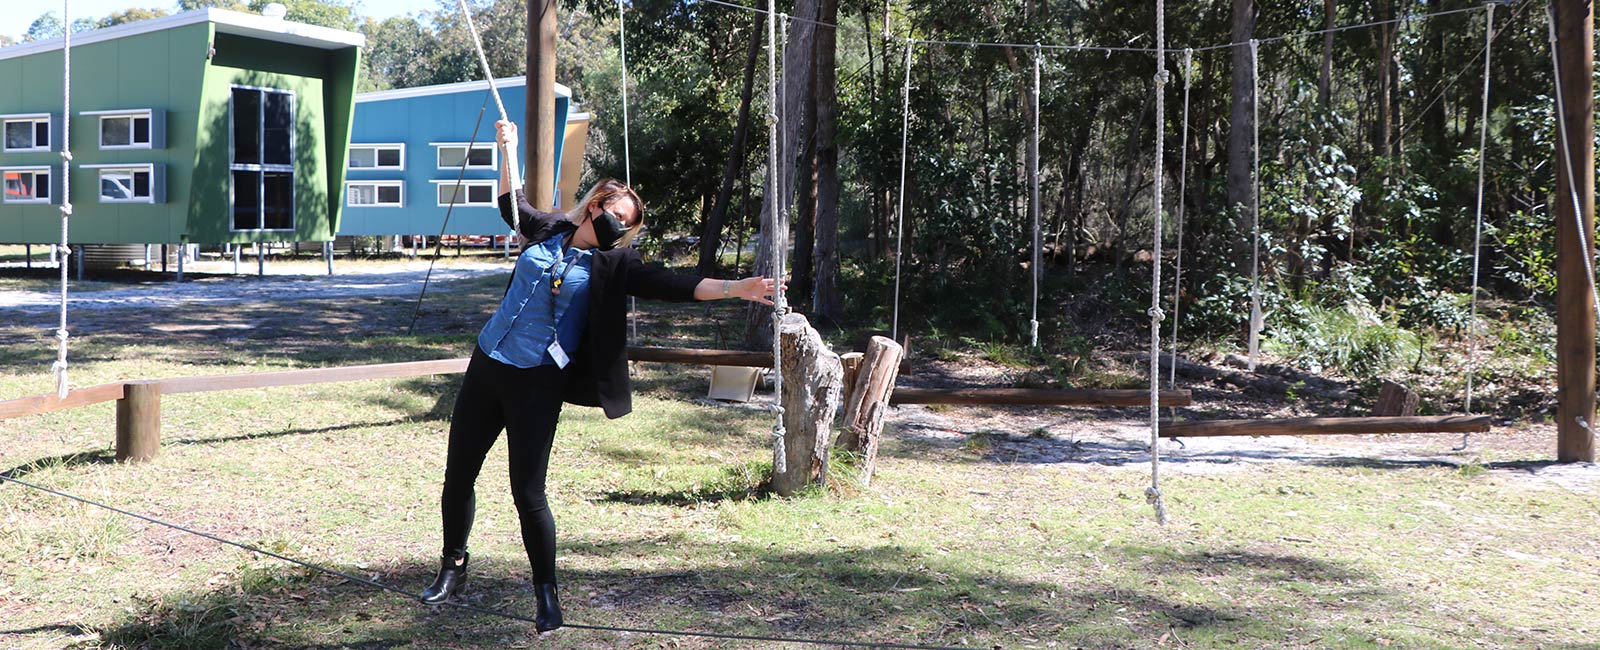 Bribie Island Retreat - low ropes course